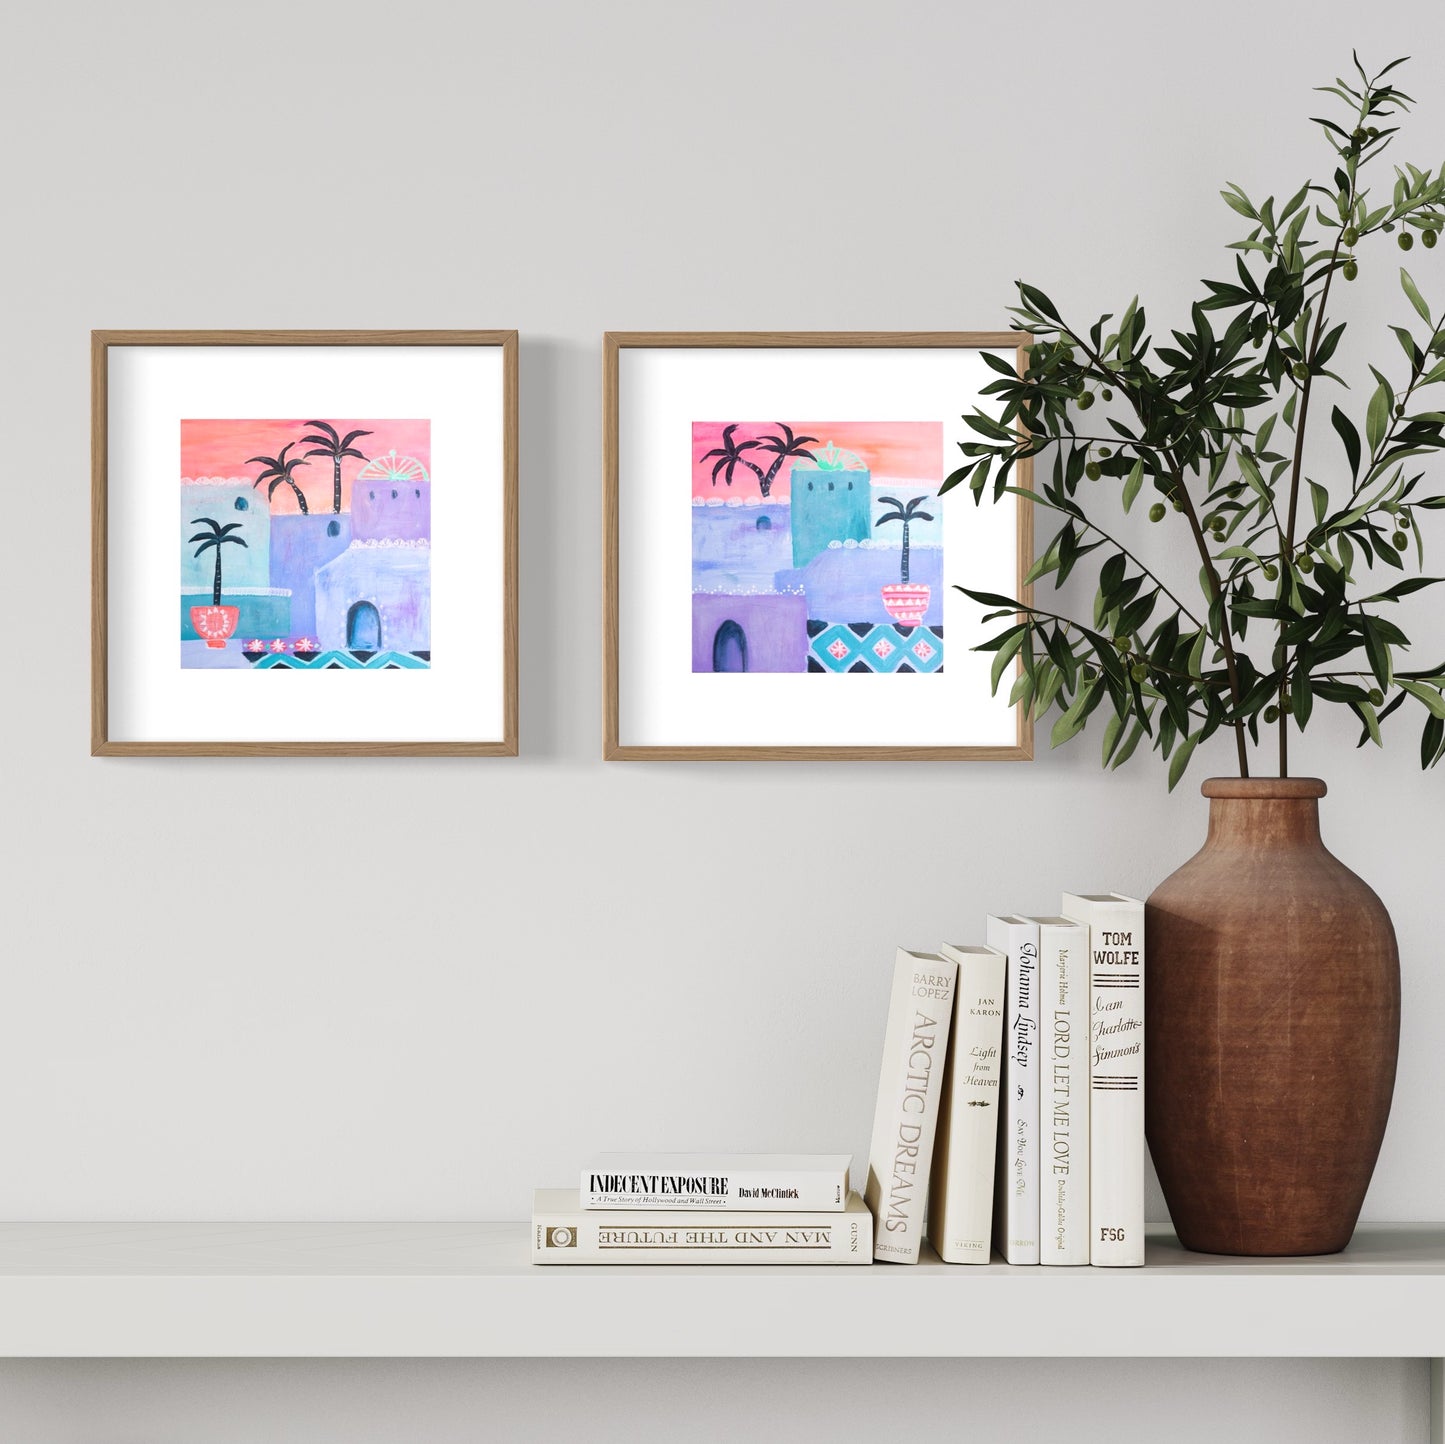 Set of two Moroccan art prints in pinks, orange, violet and teal framed in timber on wall with vase and book